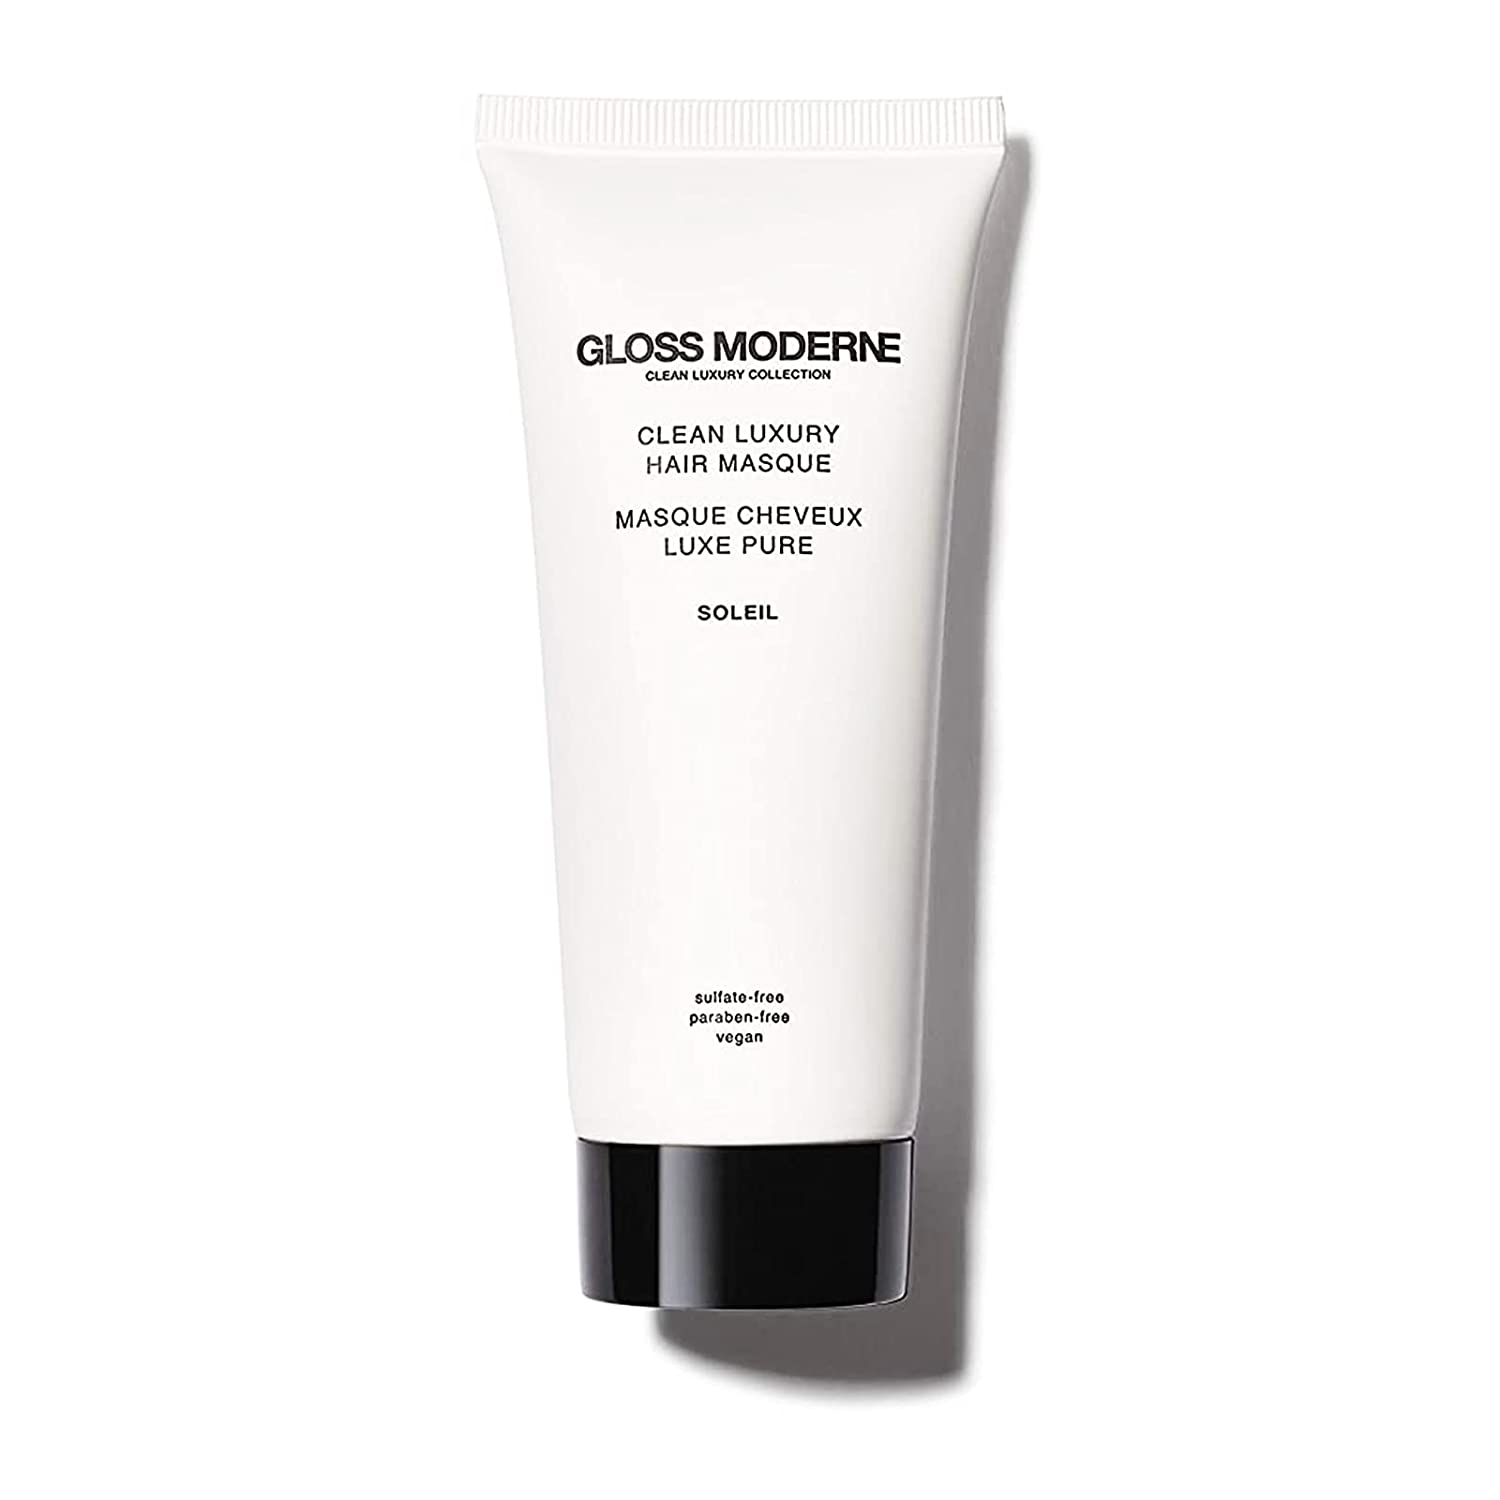 GLOSS MODERNE Clean Luxury Deep Conditioning Hair Masque by Gloss Moderne